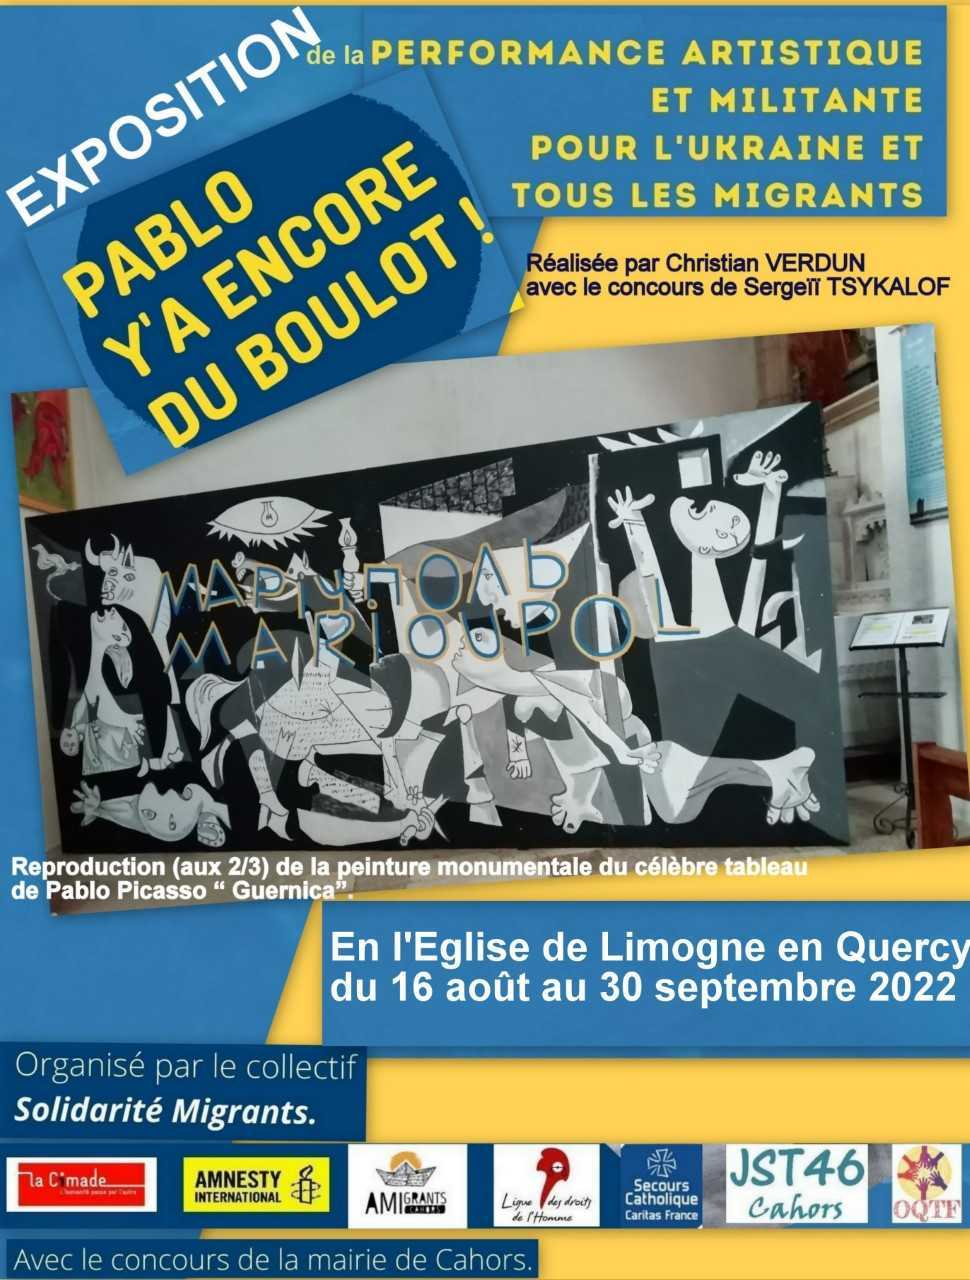 Figeac : Exposition 